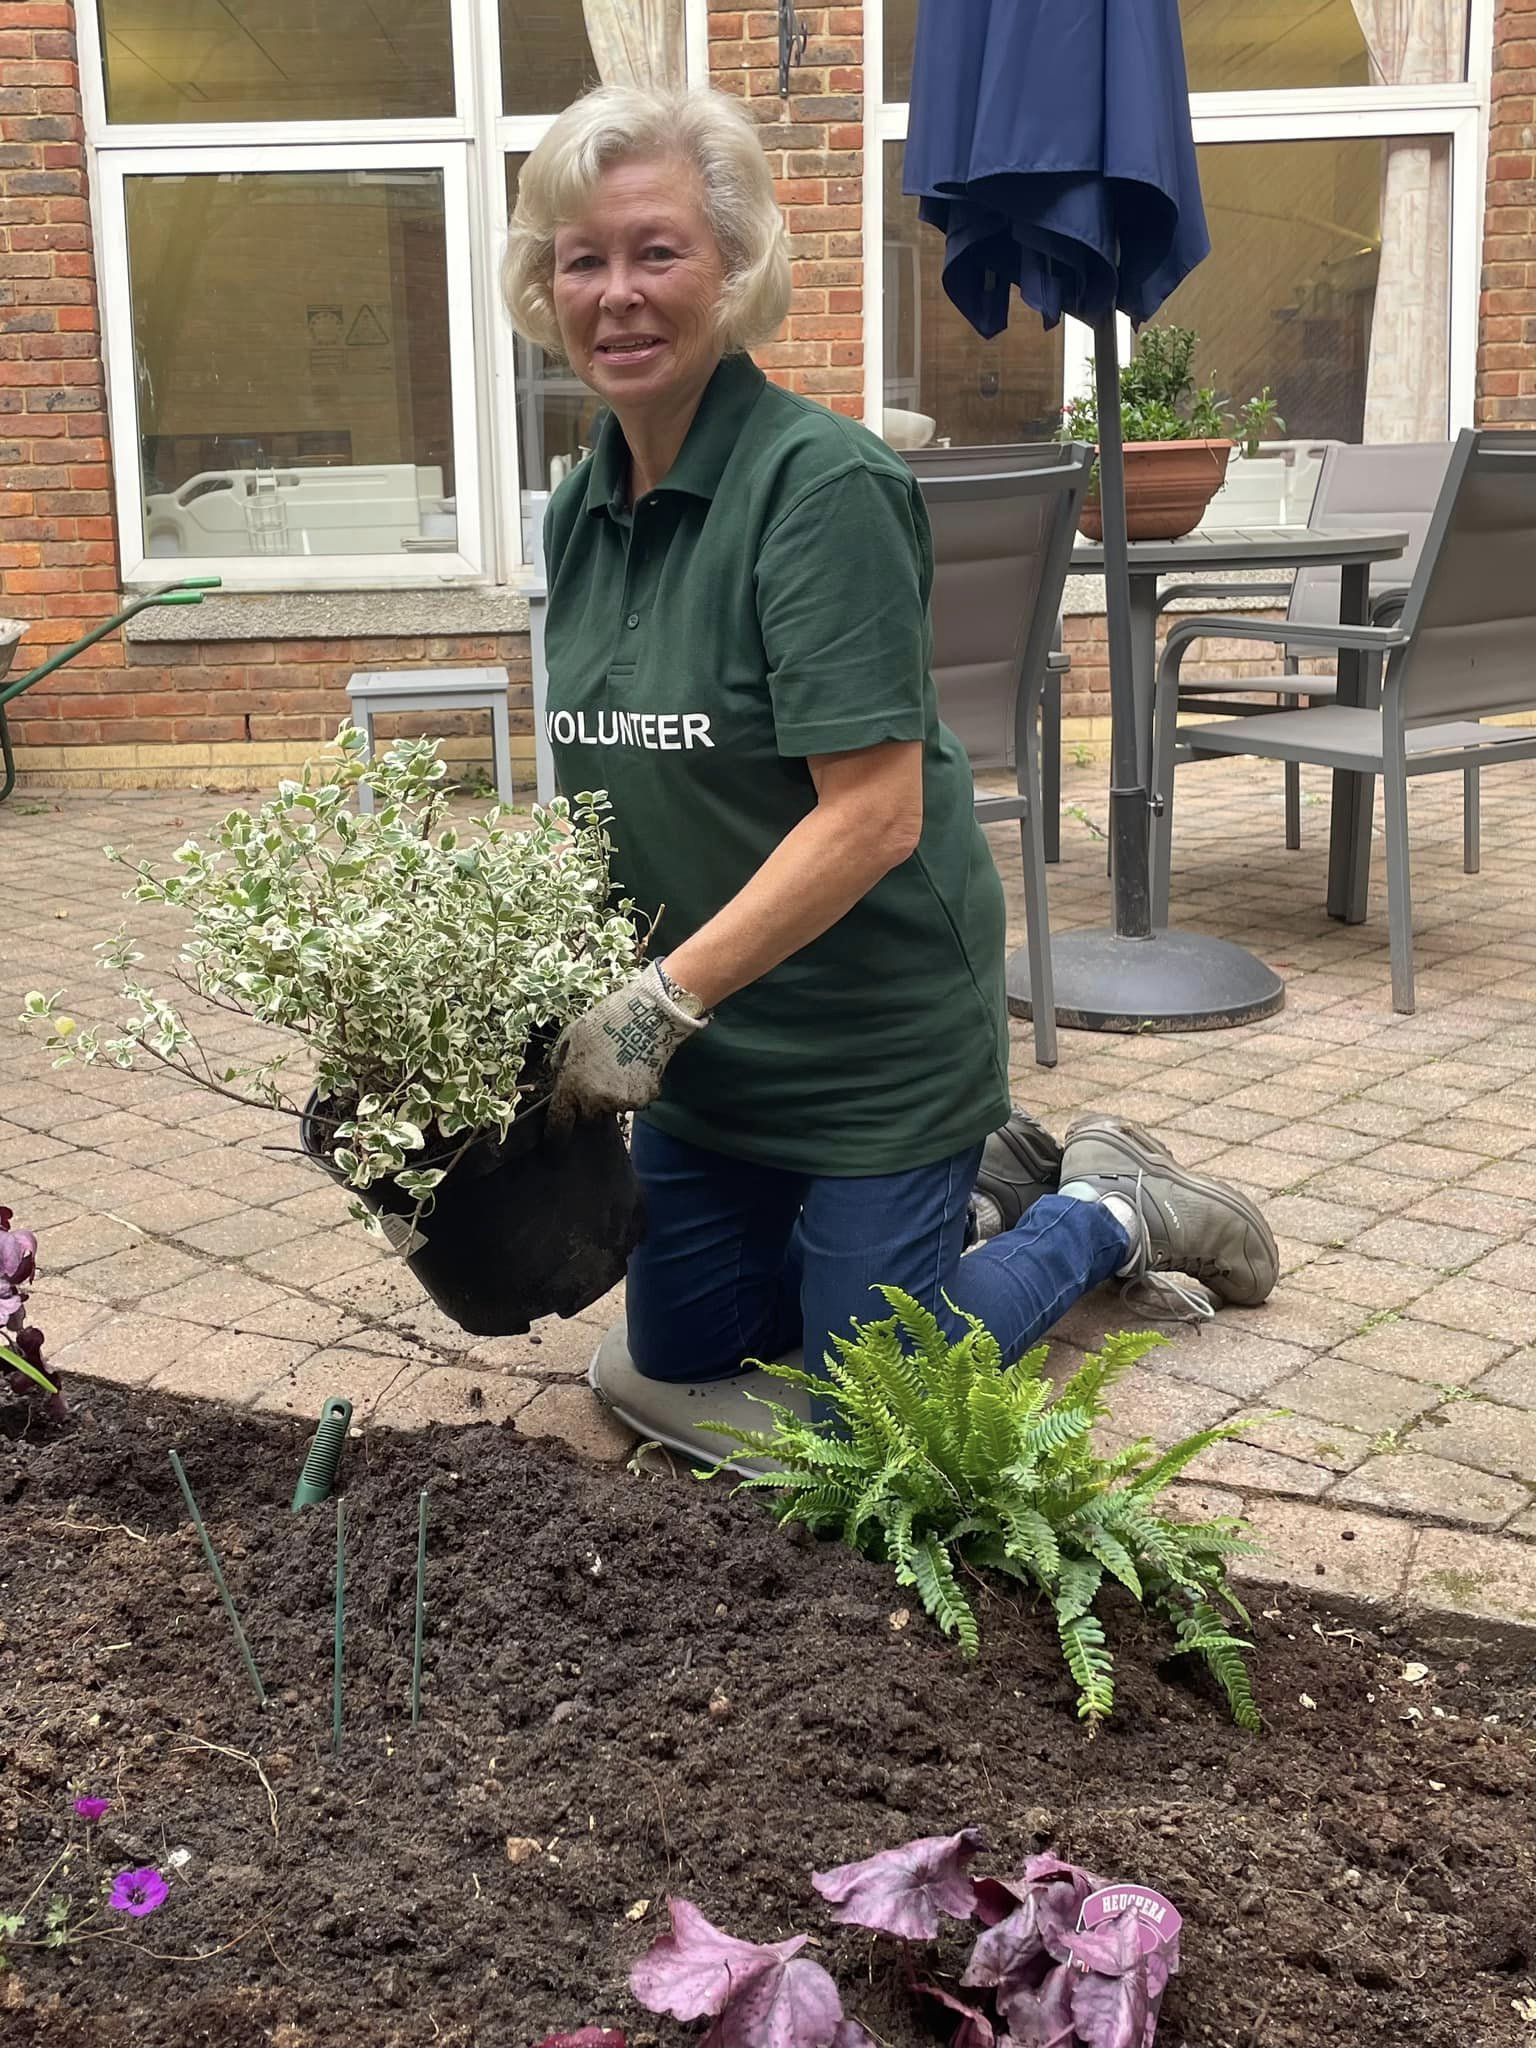 A female volunteer in a green tabard, kneeling next to a flower bed, holding a potted plant.